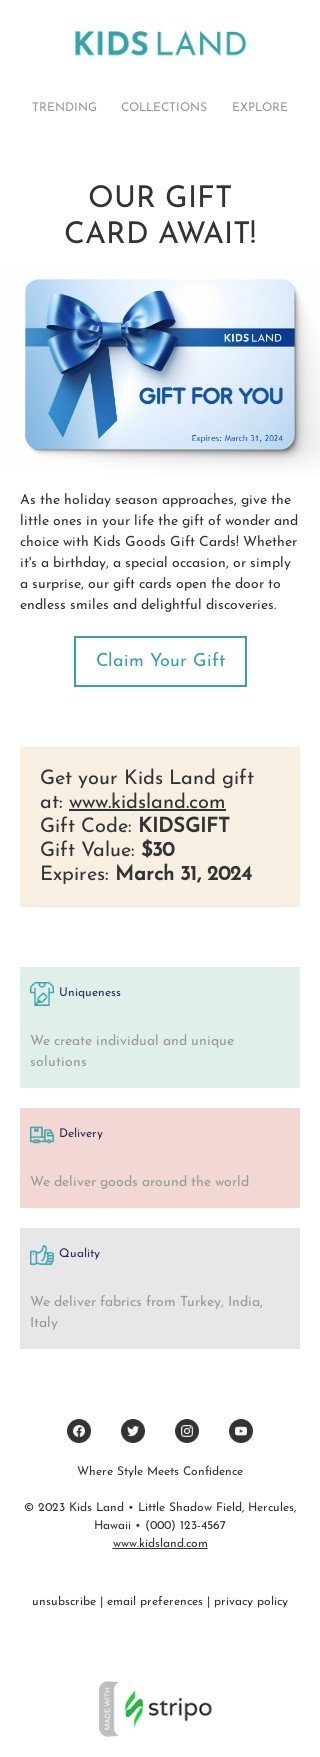 Gift сard email template "Our gift card await!" for kids goods industry mobile view